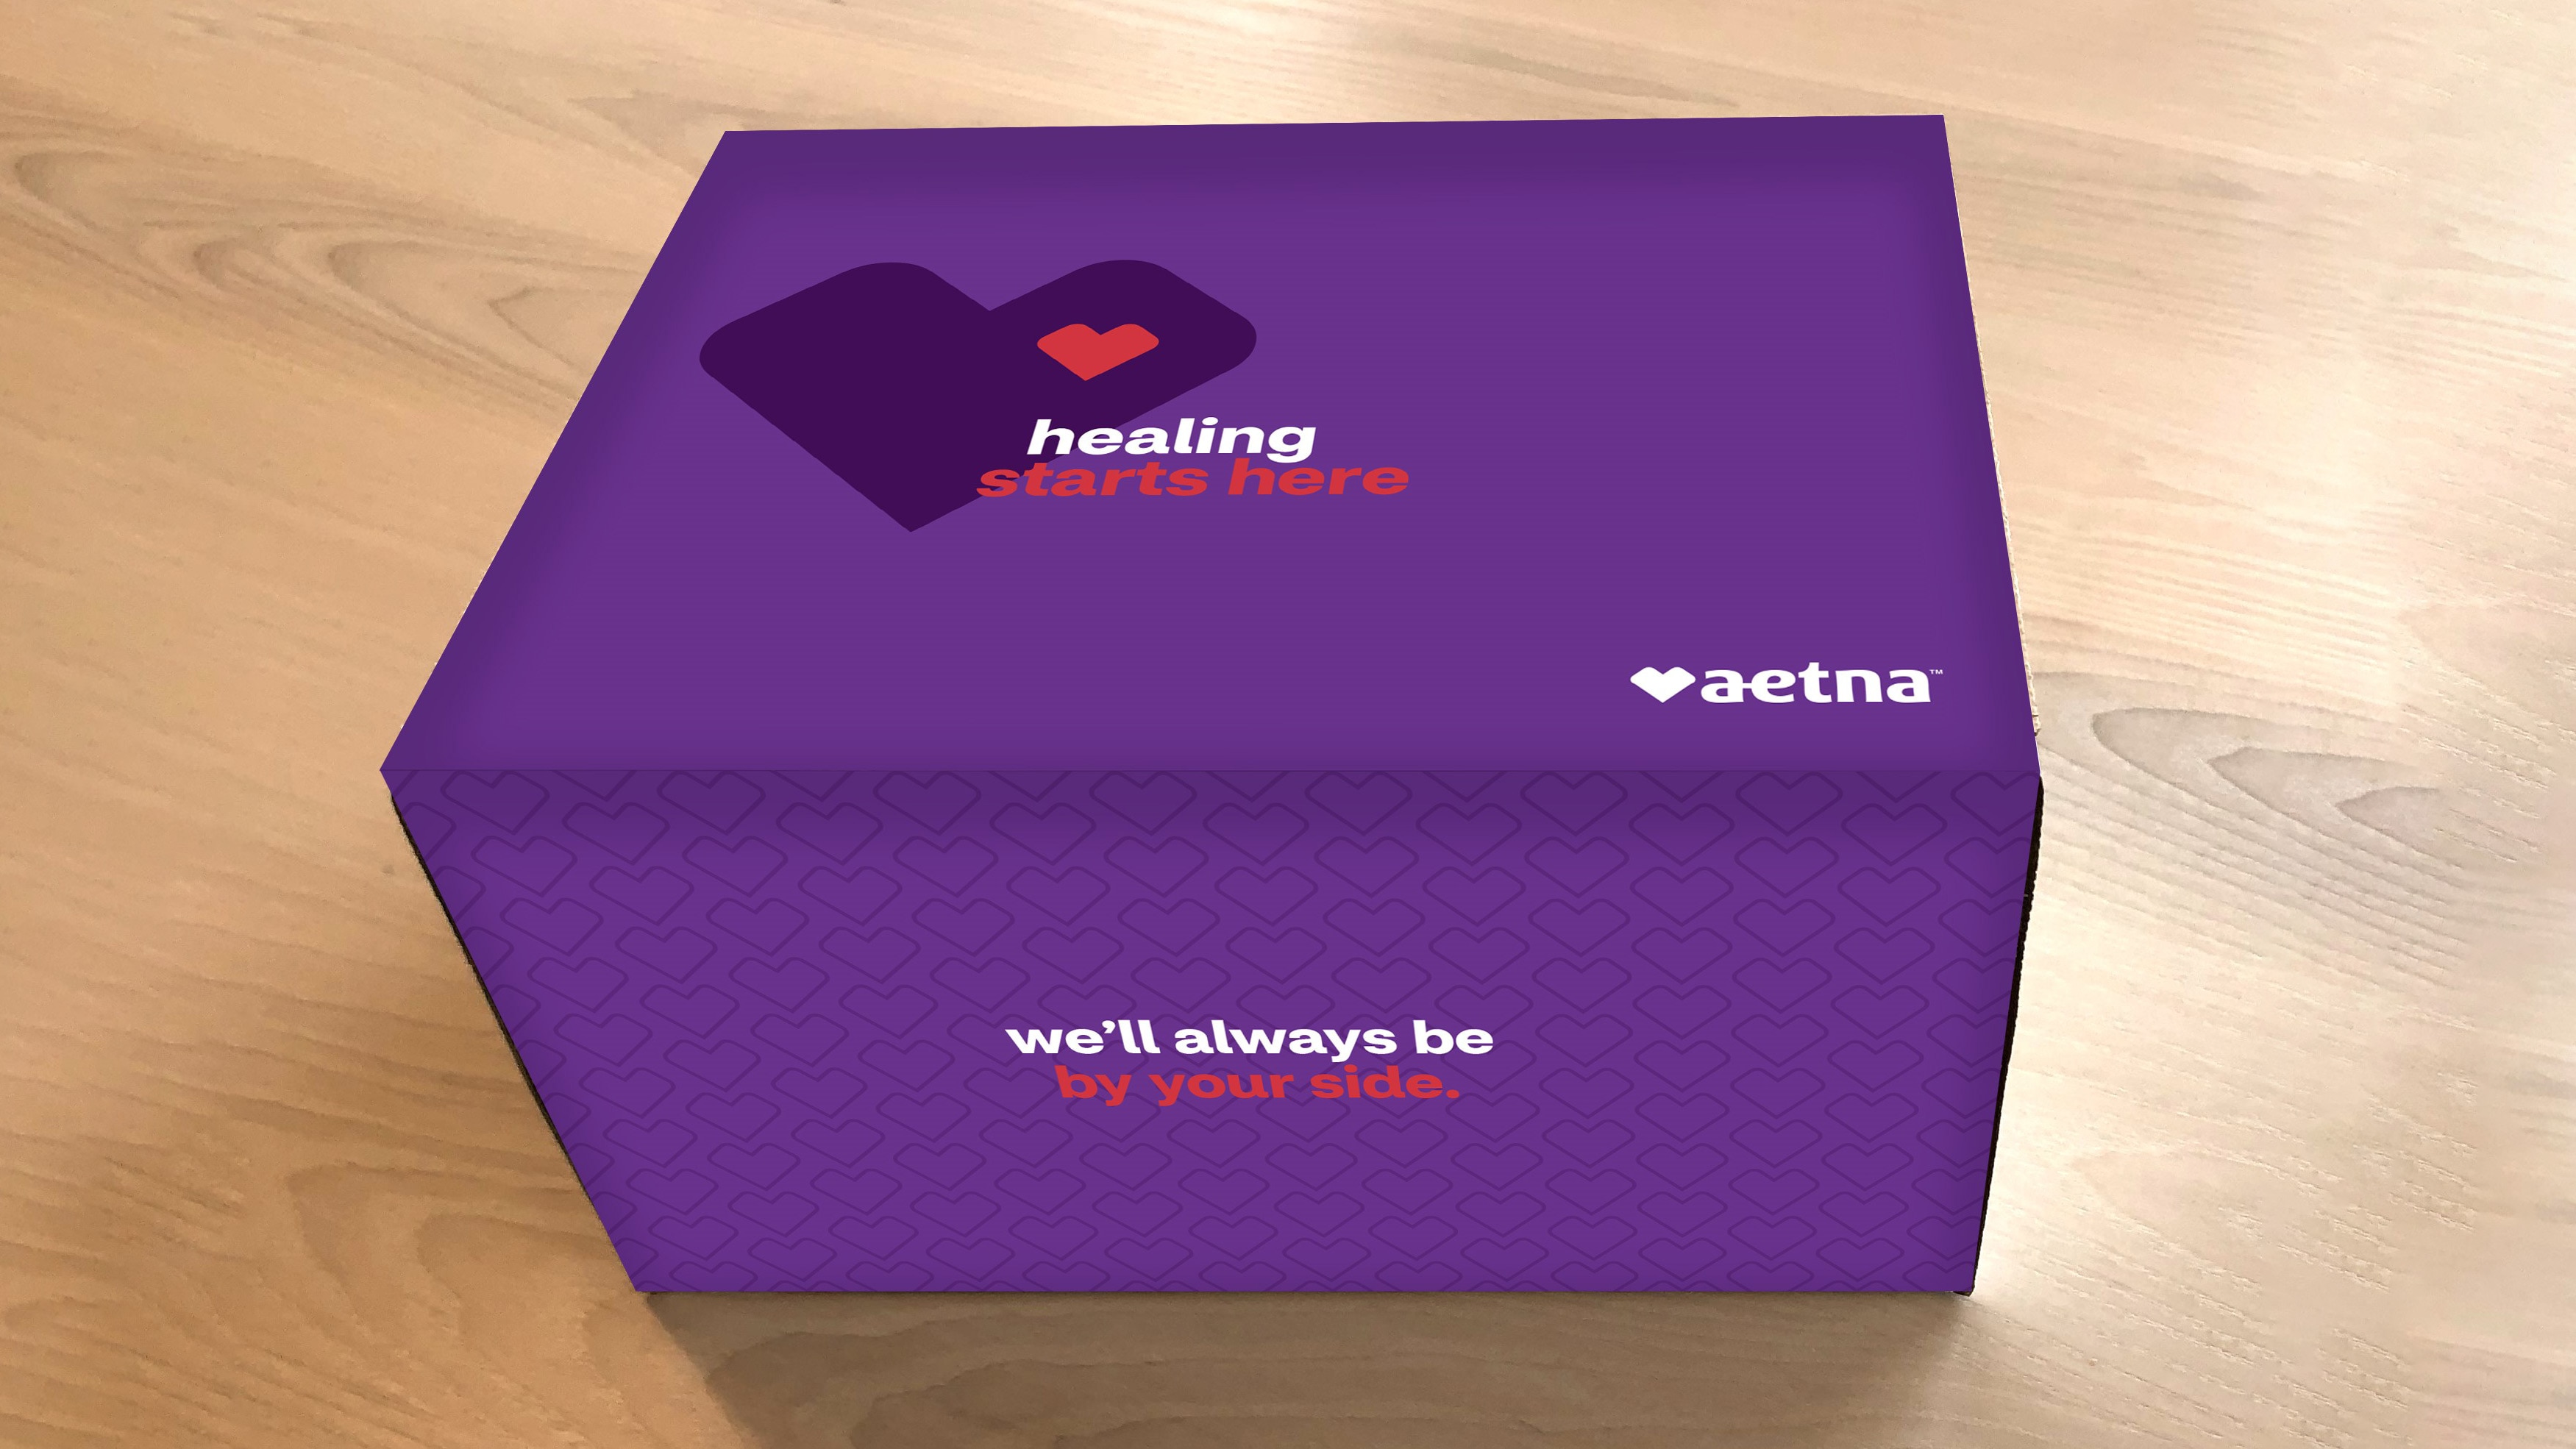 A COVID-19 care package, provided to members through the Aetna Healing Better program.